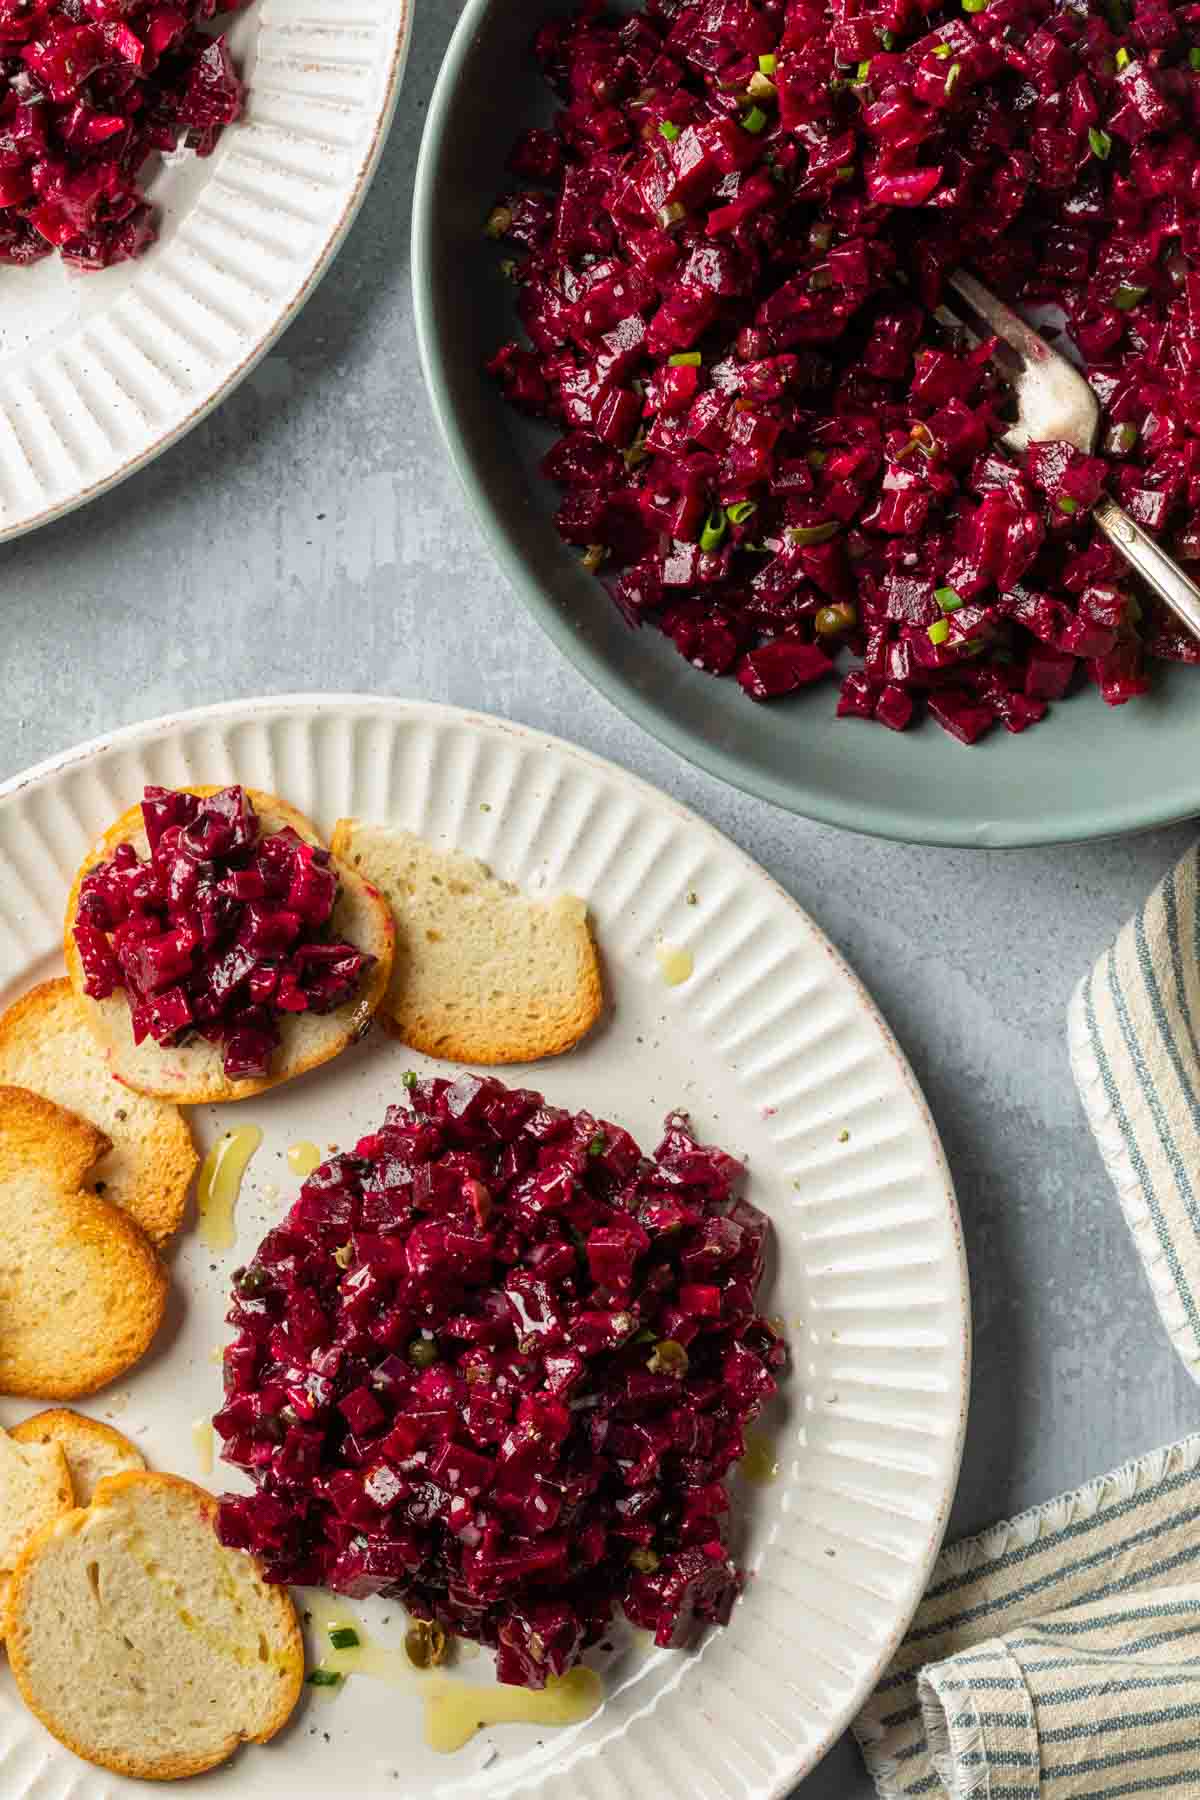 Beetroot tartare in a serving bowl next to a plate with tartare served with crostinis. 